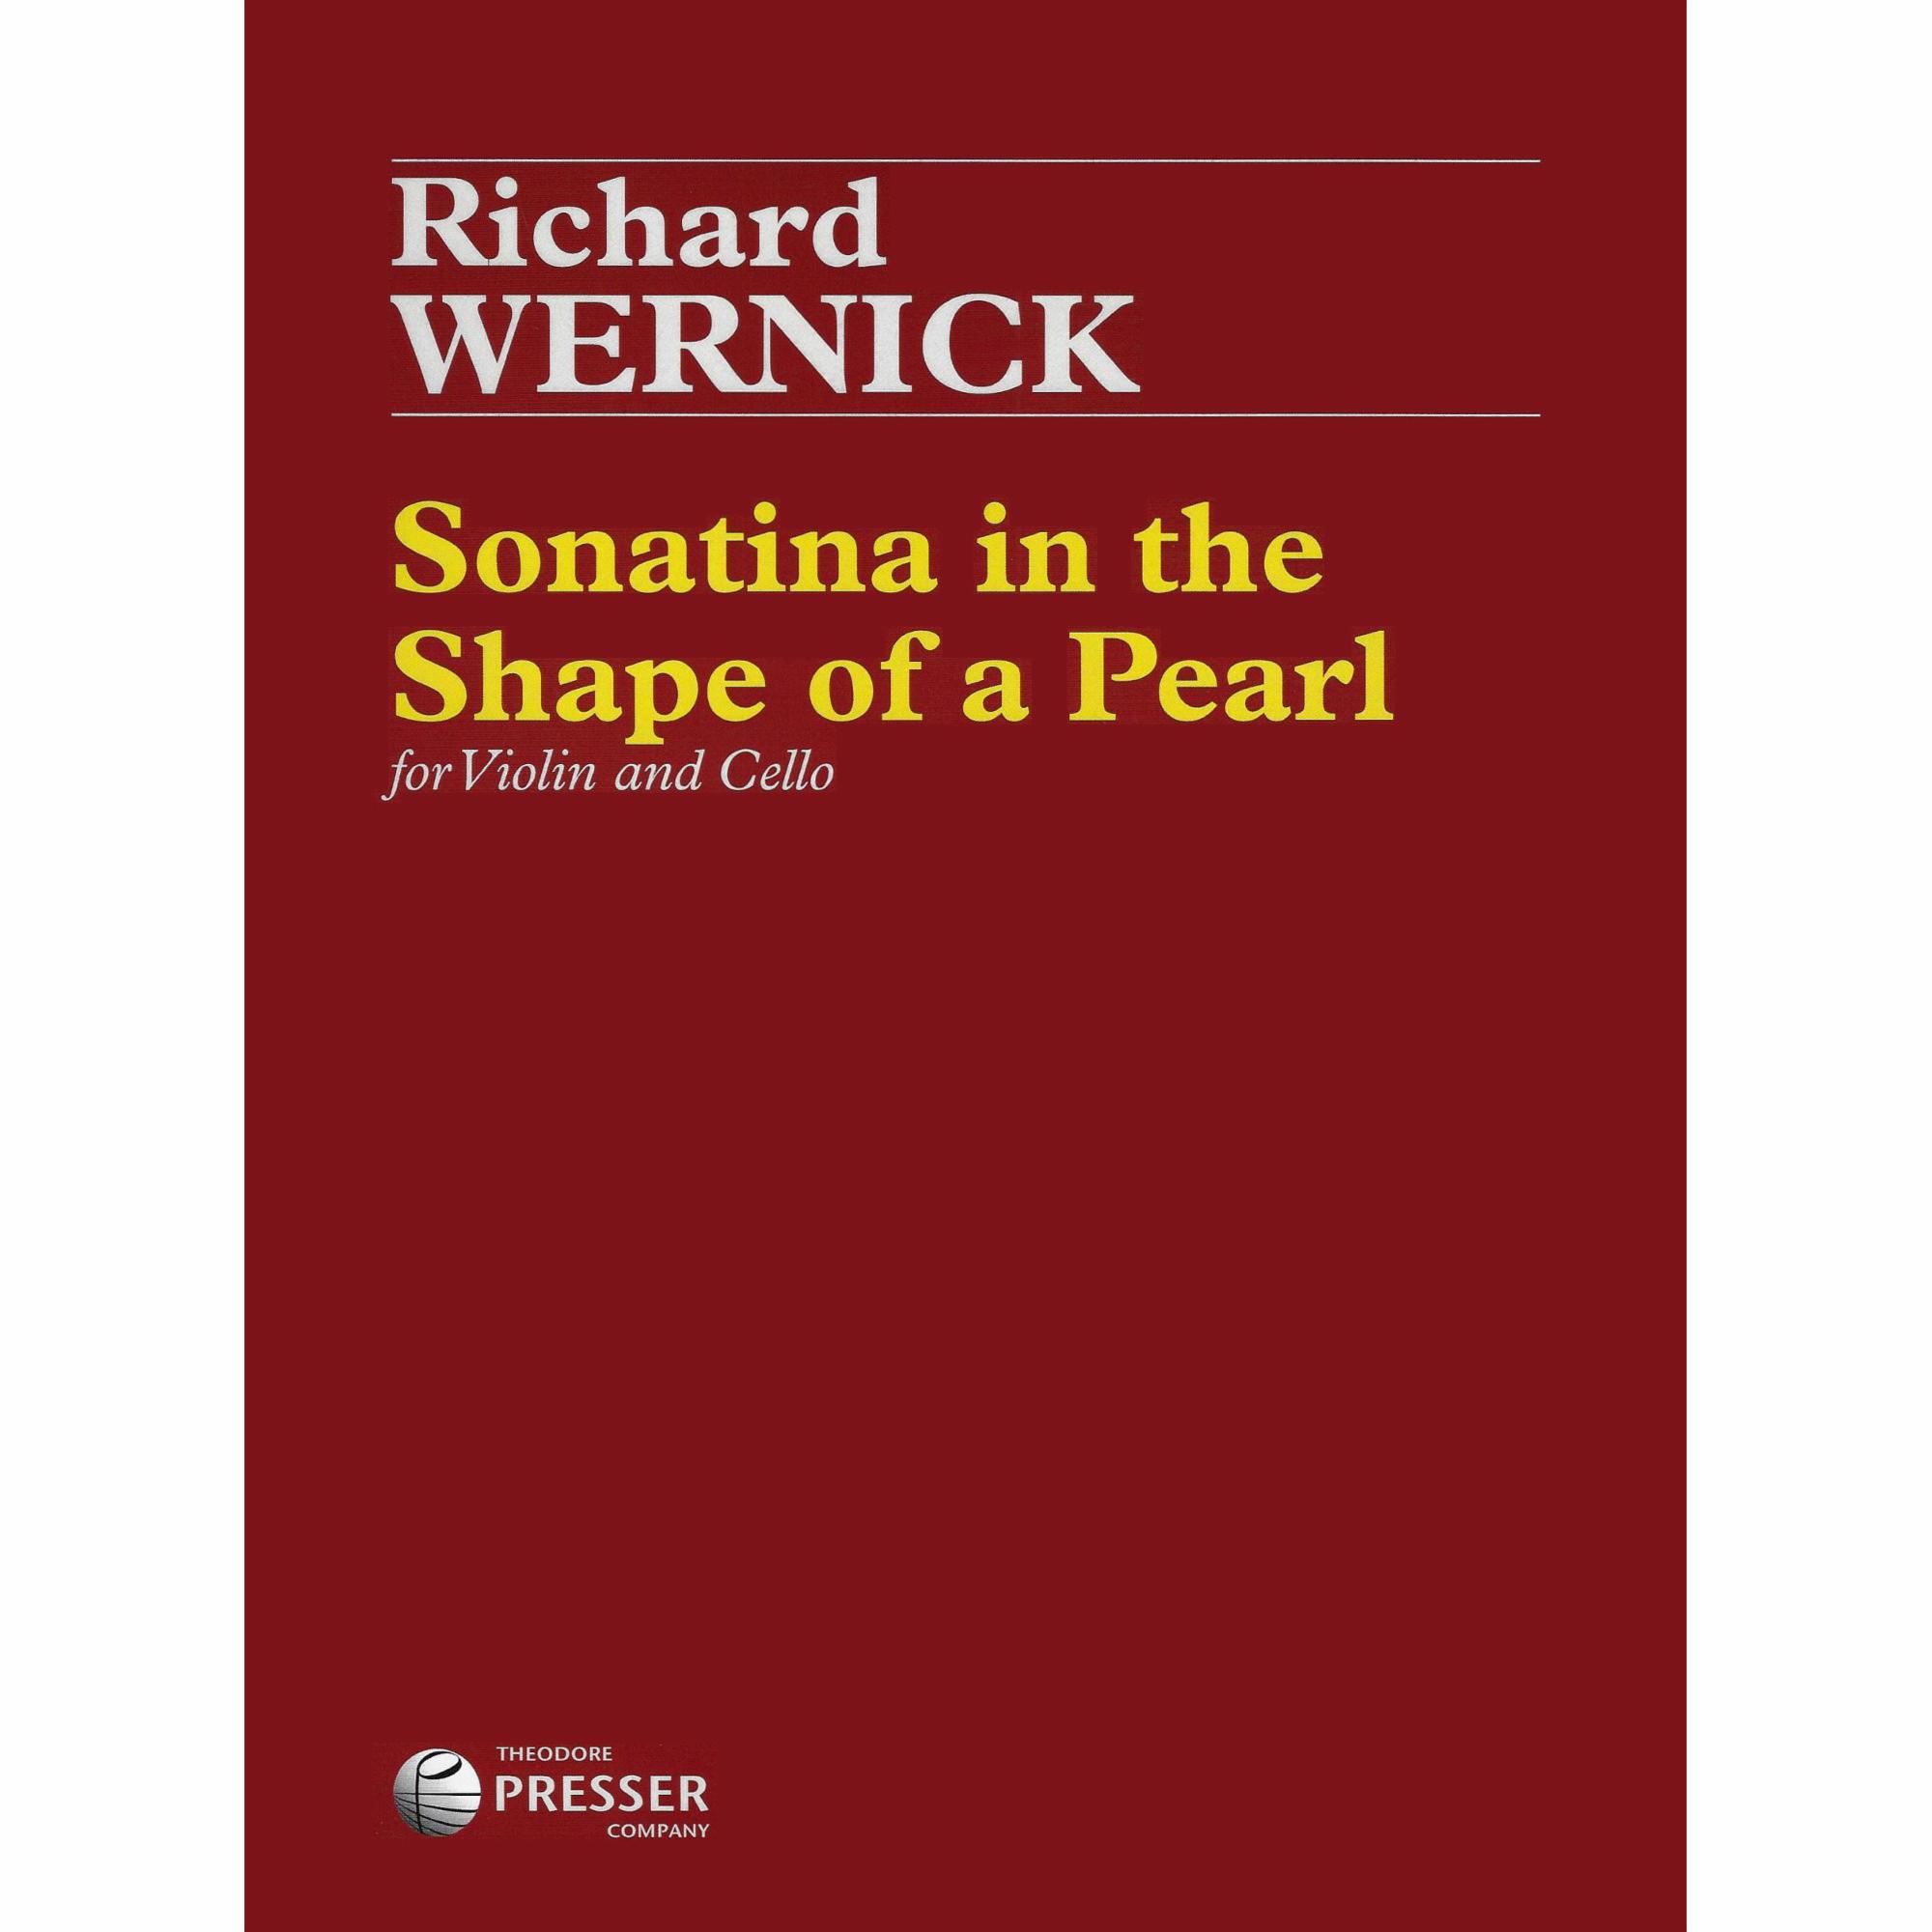 Wernick -- Sonatina in the Shape of a Pearl for Violin and Cello